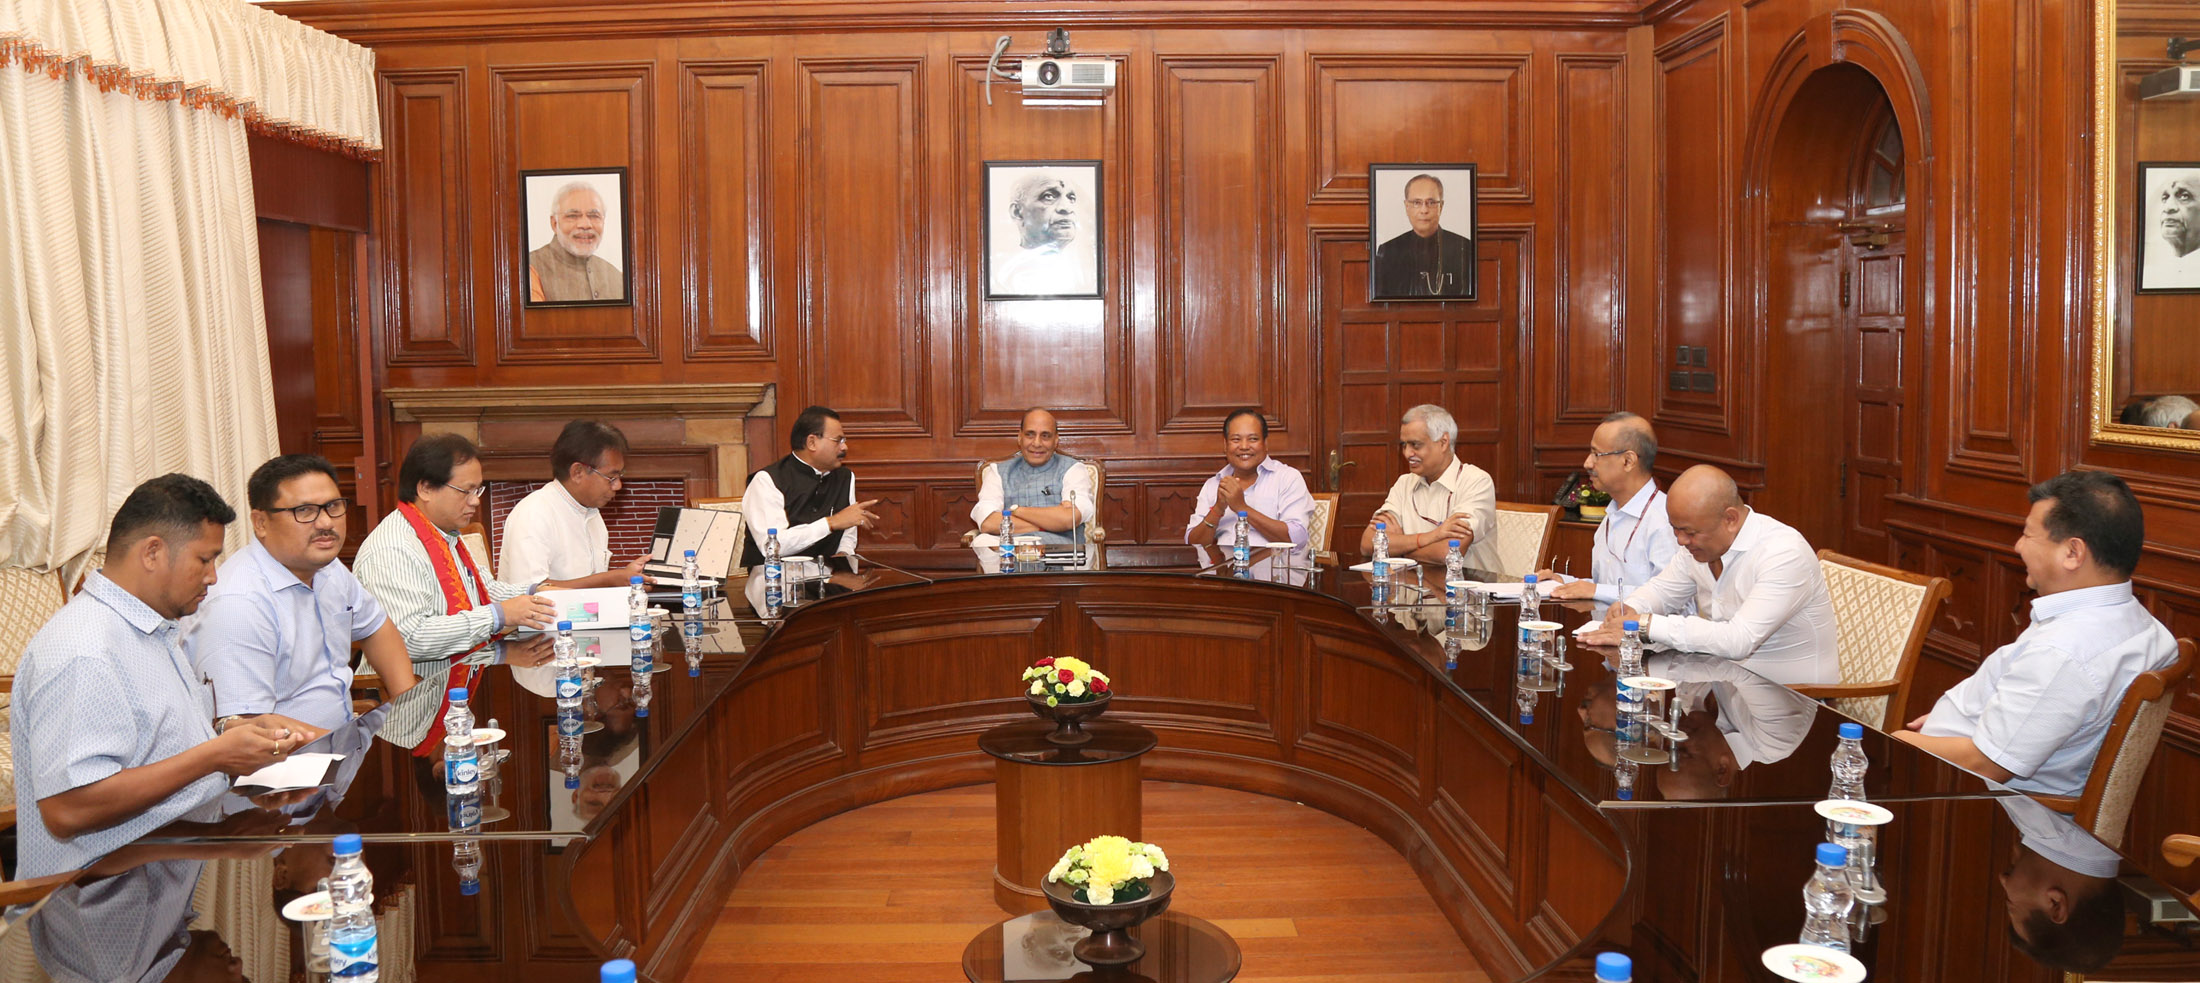 A delegation led by the Minister of Commerce and Industry, Transport and Parliamentary Affairs, Government of Assam, Shri Chandra Mohan Patowary calling on the Union Home Minister, Shri Rajnath Singh, in New Delhi on October 26, 2016.